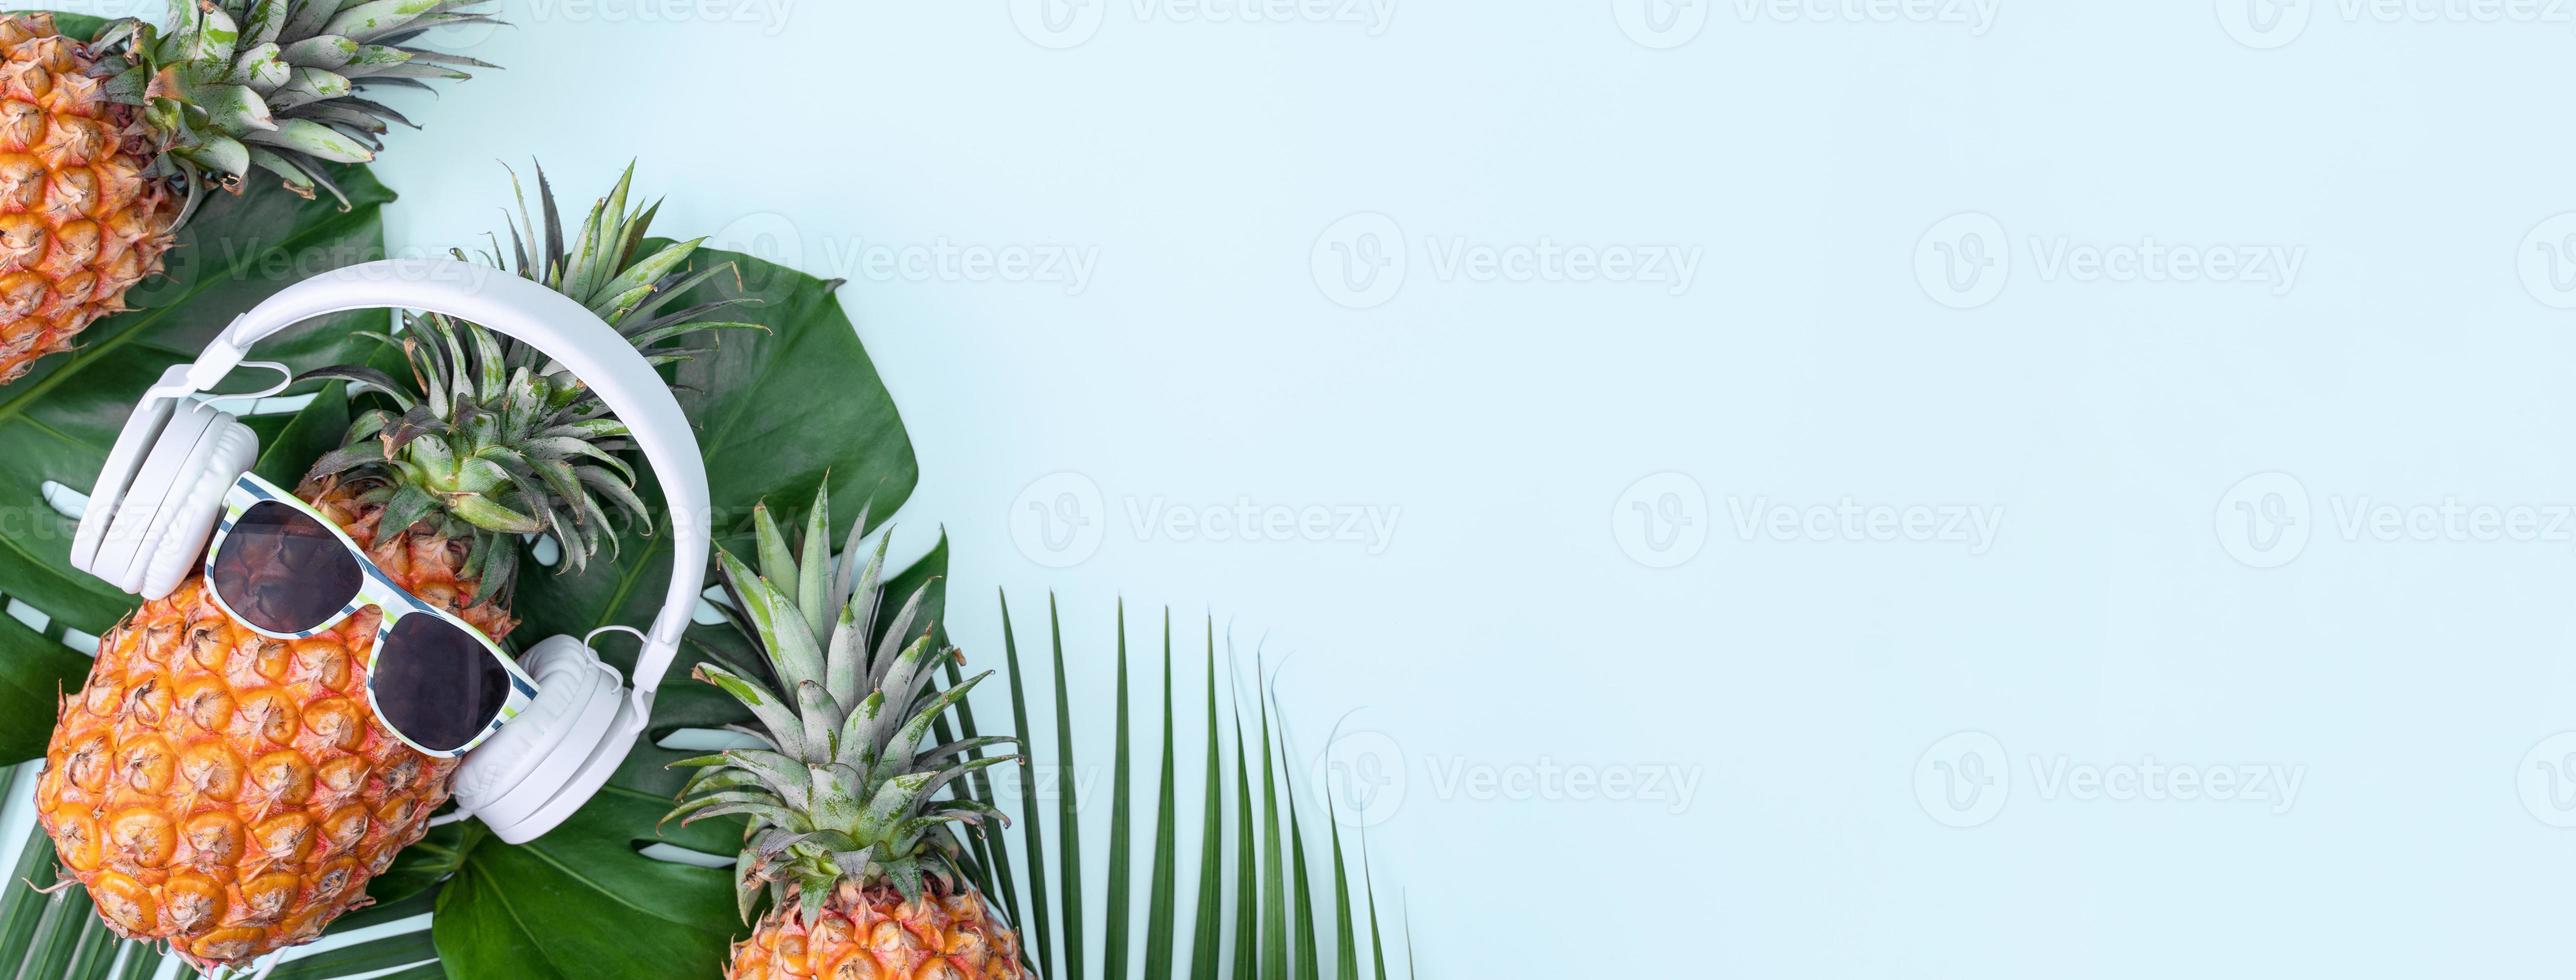 Funny pineapple wearing white headphone, concept of listening music, isolated on blue background with tropical palm leaves, top view, flat lay design. photo